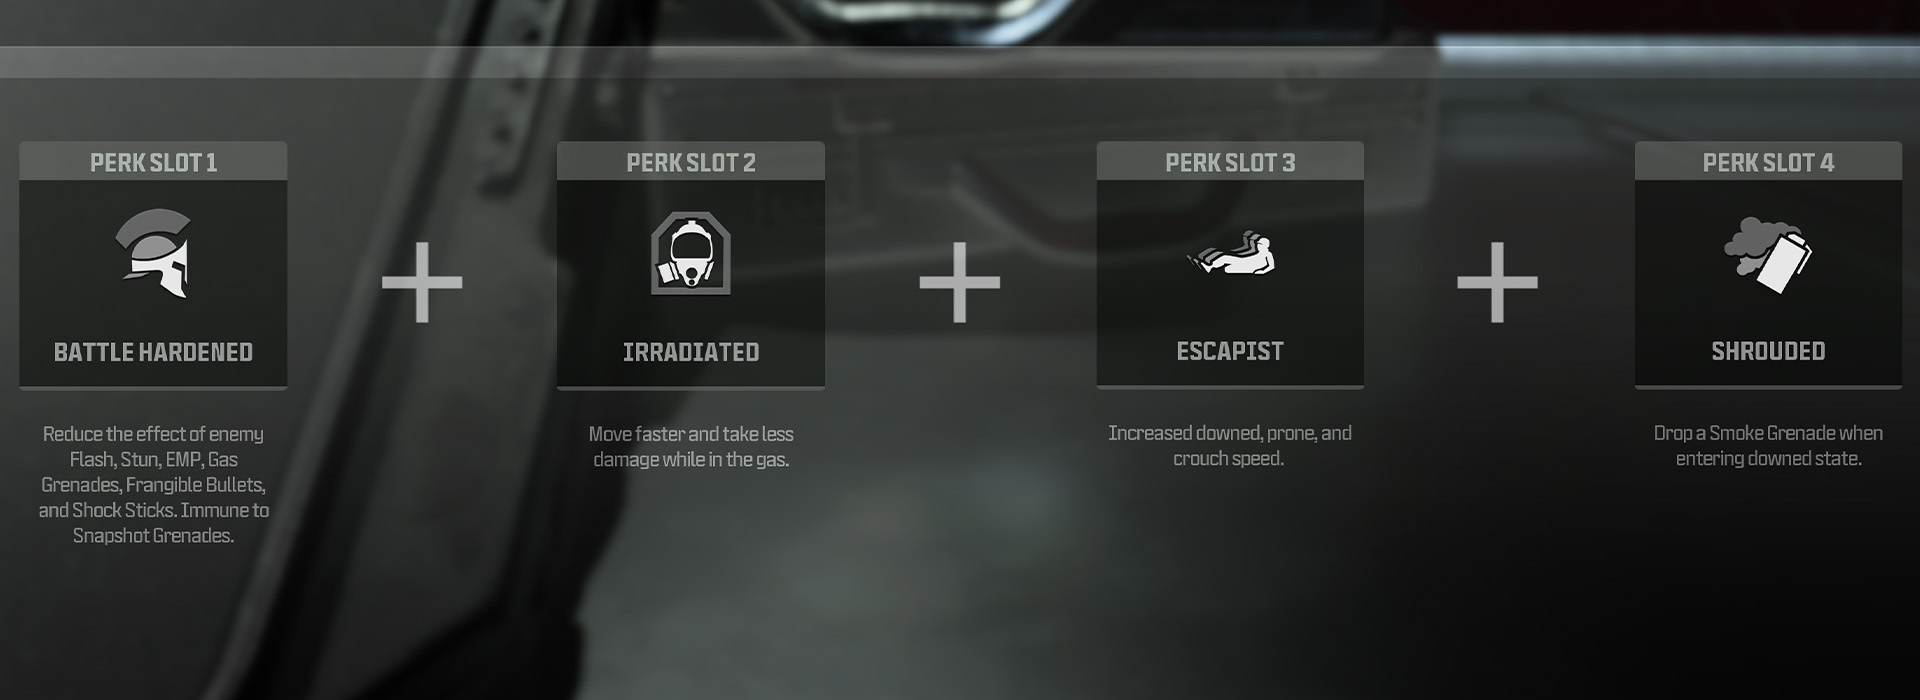 New Perks in Call of Duty Warzone